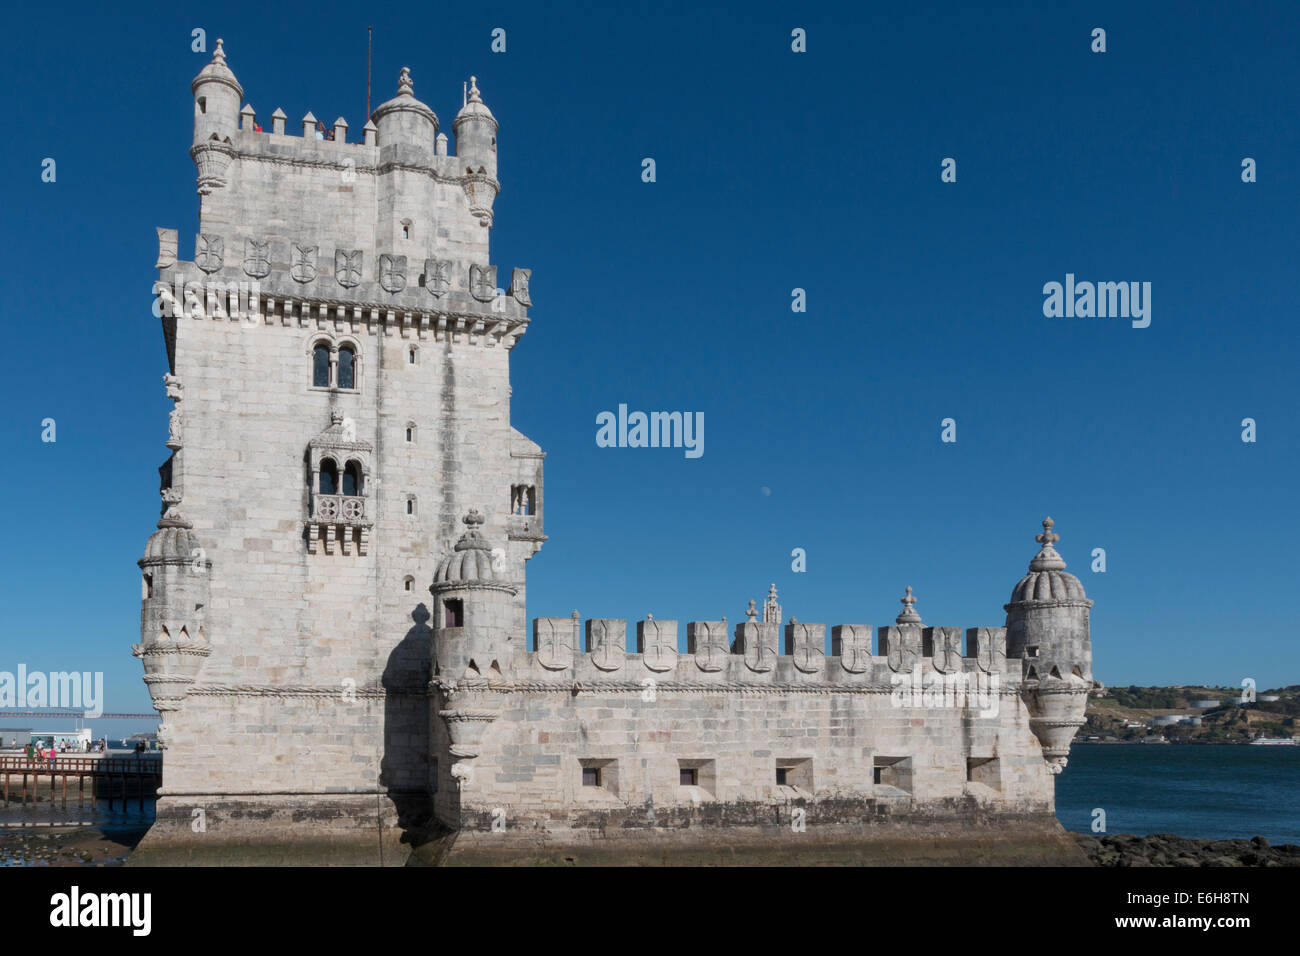 View of the beautiful monument Tower of Belem, located on Lisbon, Portugal Stock Photo